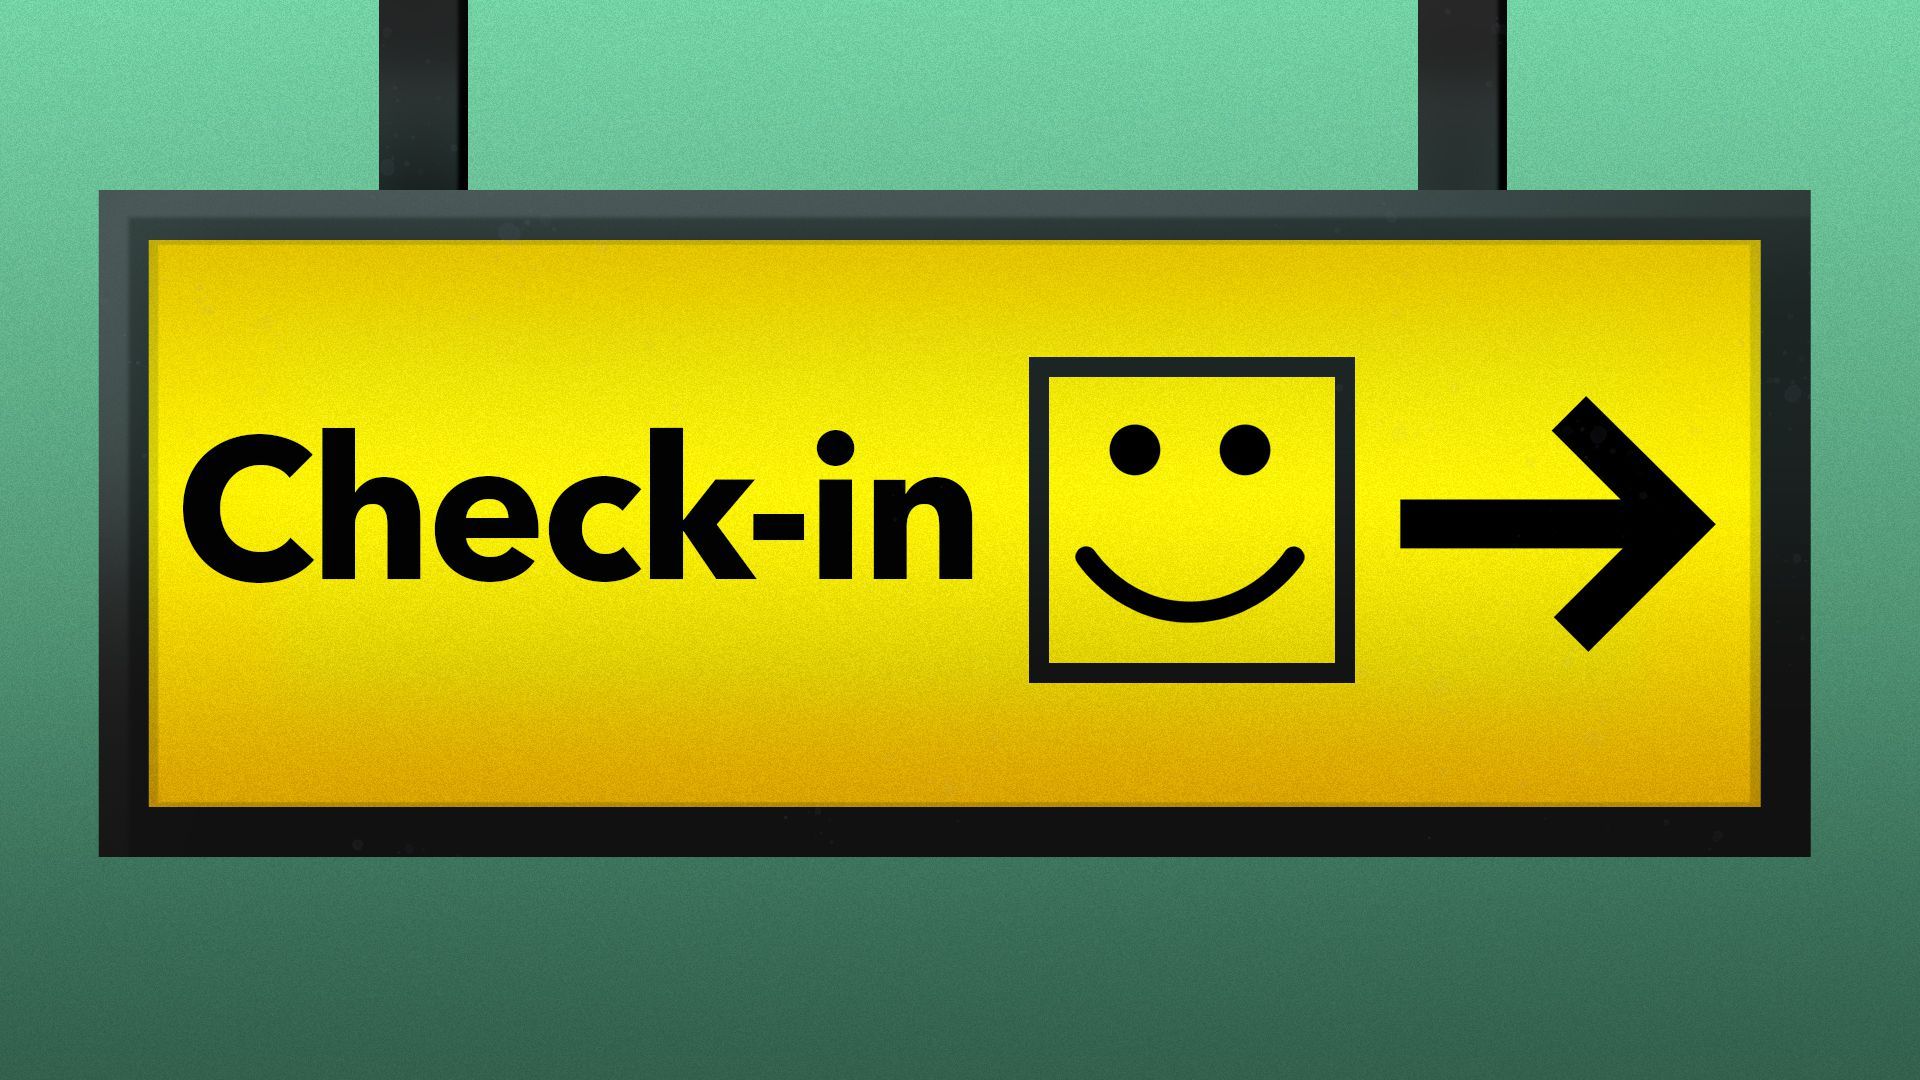 Illustration of an airport check-in sign with a happy face